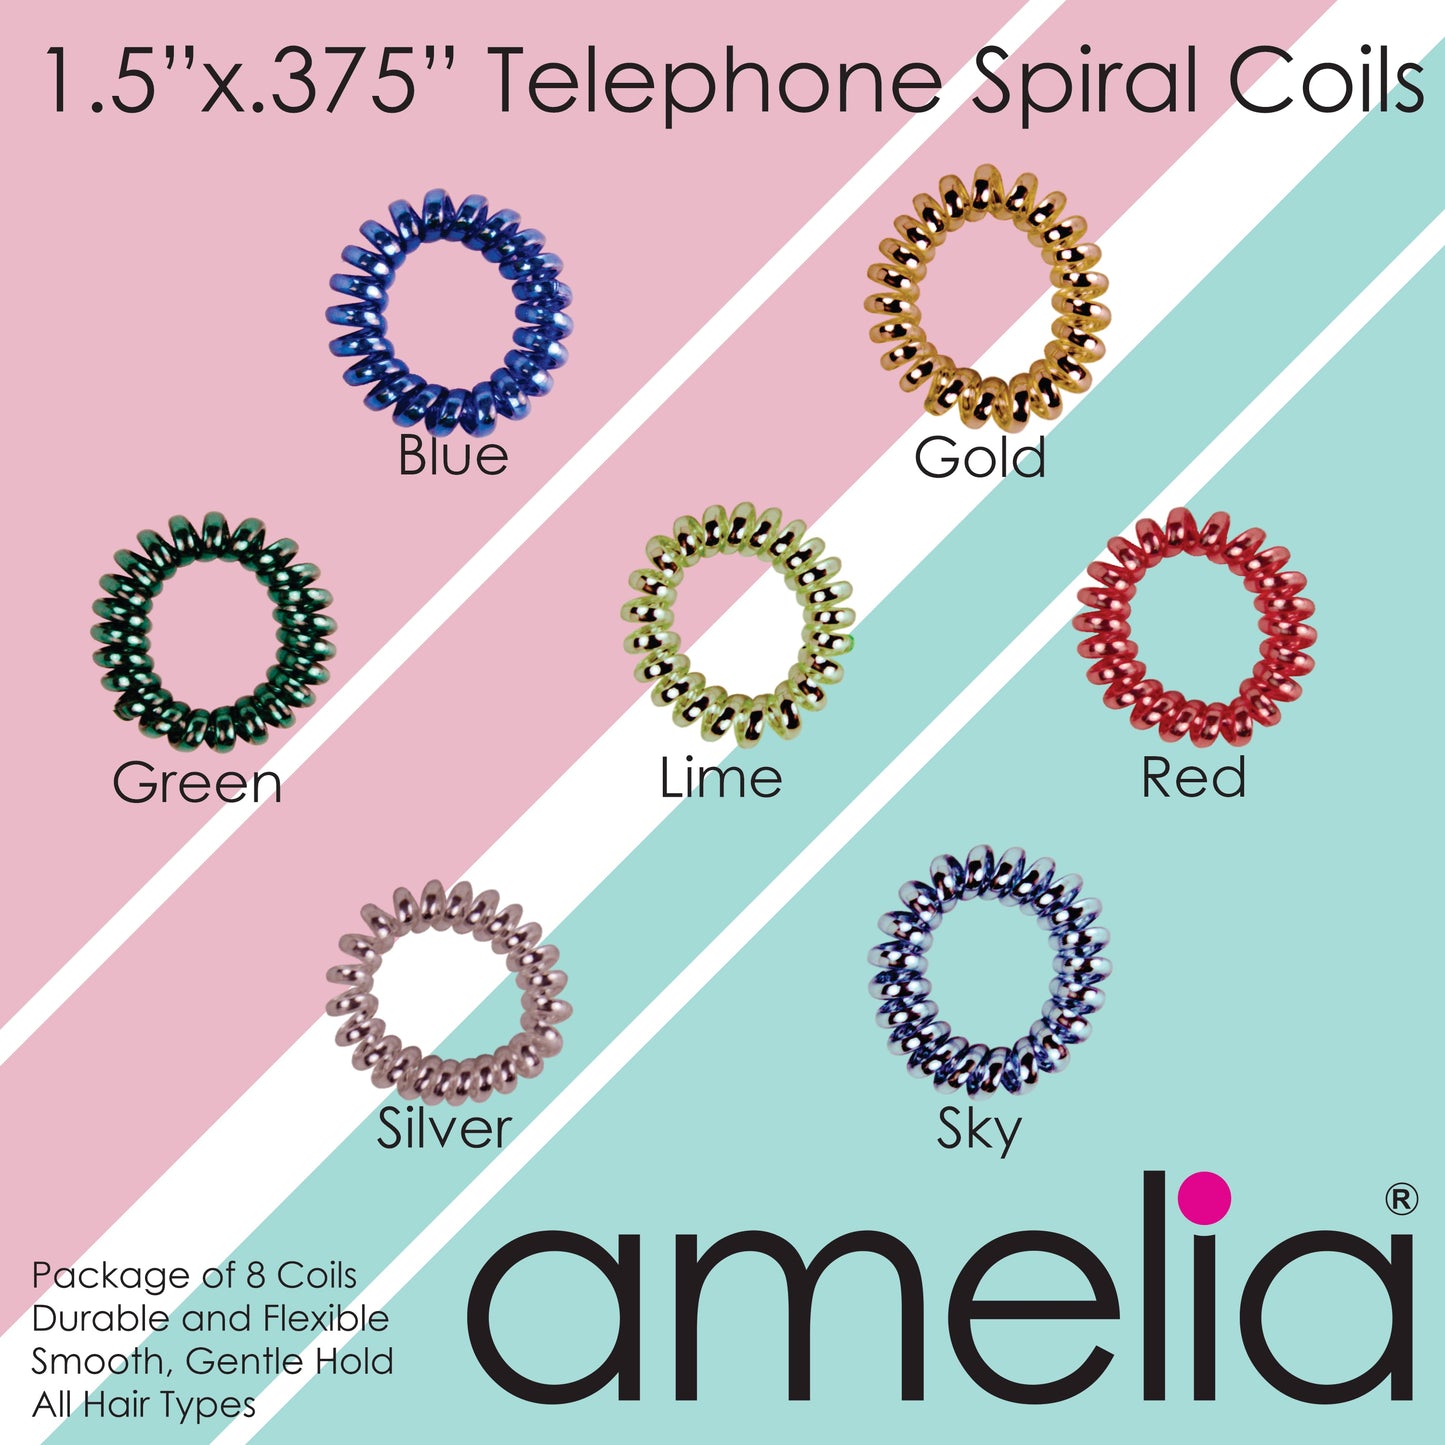 Amelia Beauty, 8 Small Shinny Elastic Hair Telephone Cord Coils, 1.5in Diameter Spiral Hair Ties, Strong Hold, Gentle on Hair, Red, Silver and Green